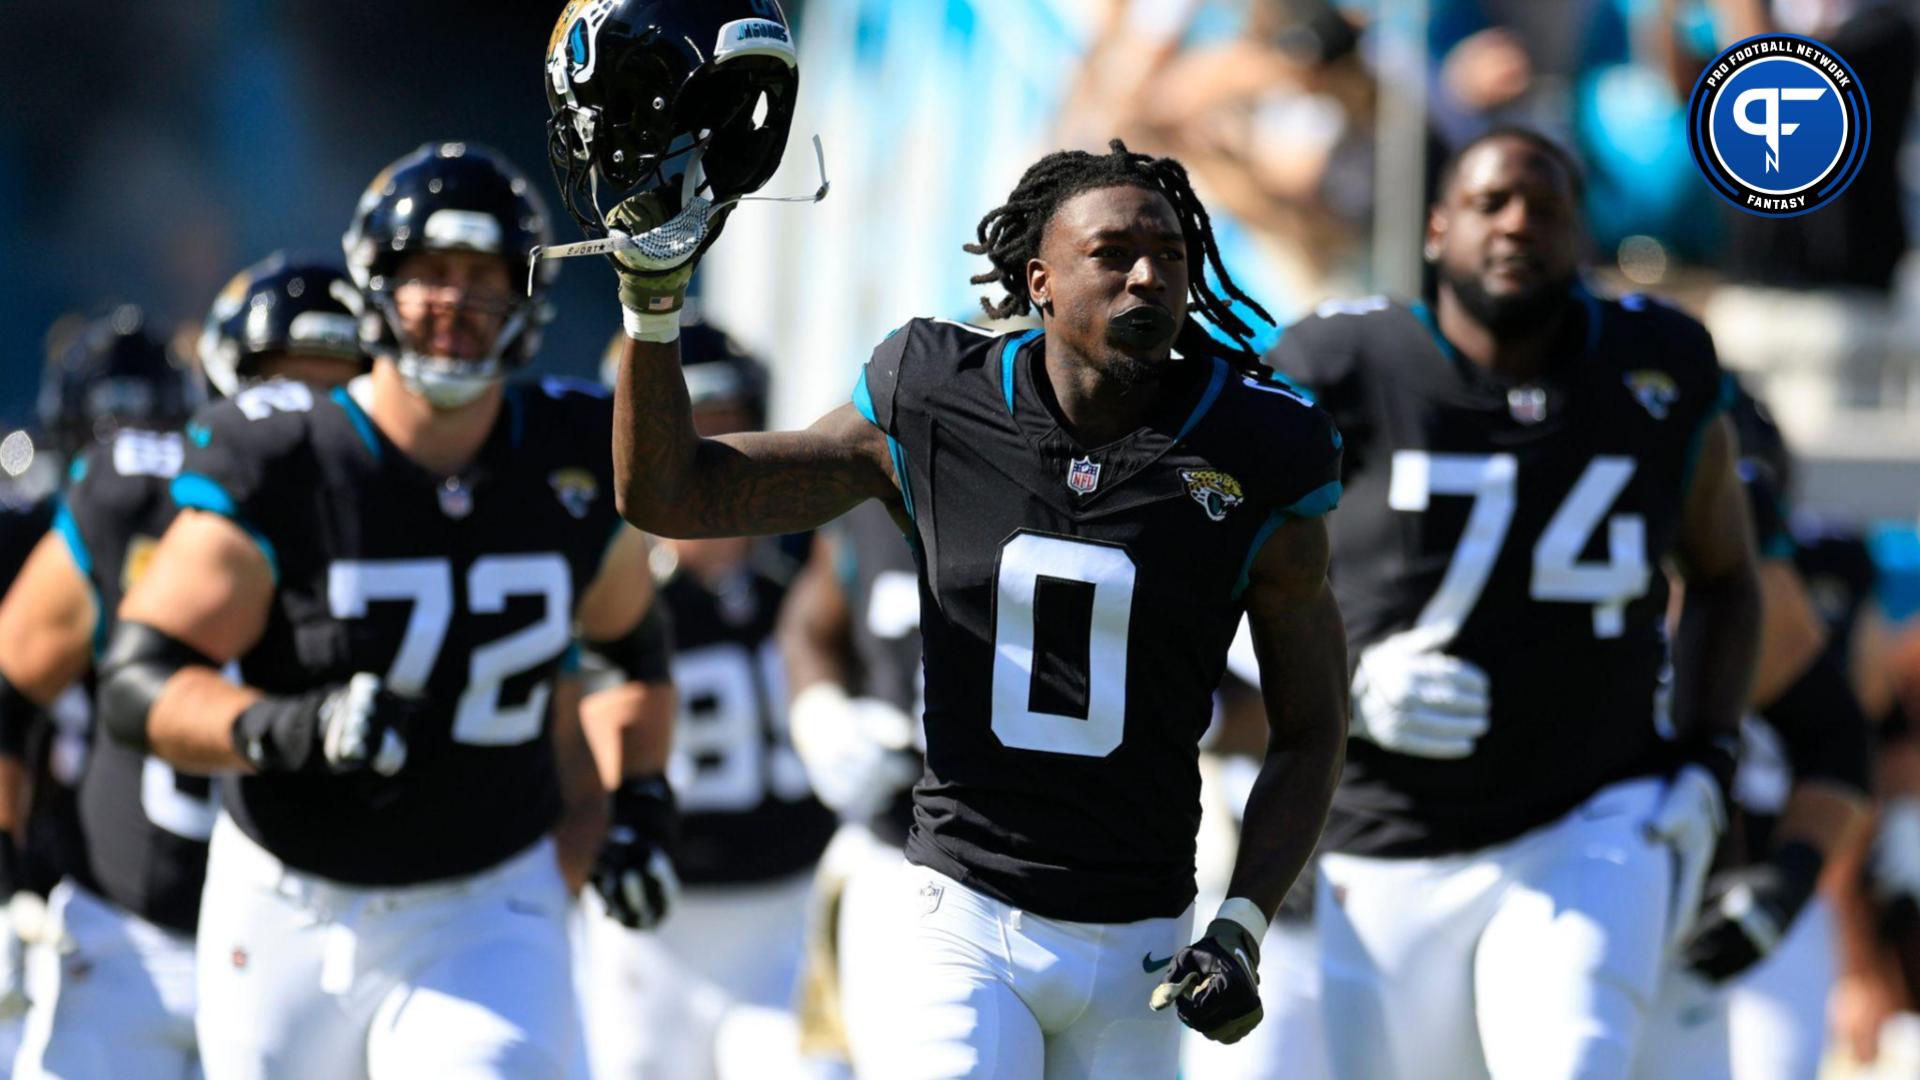 Jacksonville Jaguars wide receiver Calvin Ridley (0) leads his team onto the field before an NFL football matchup.